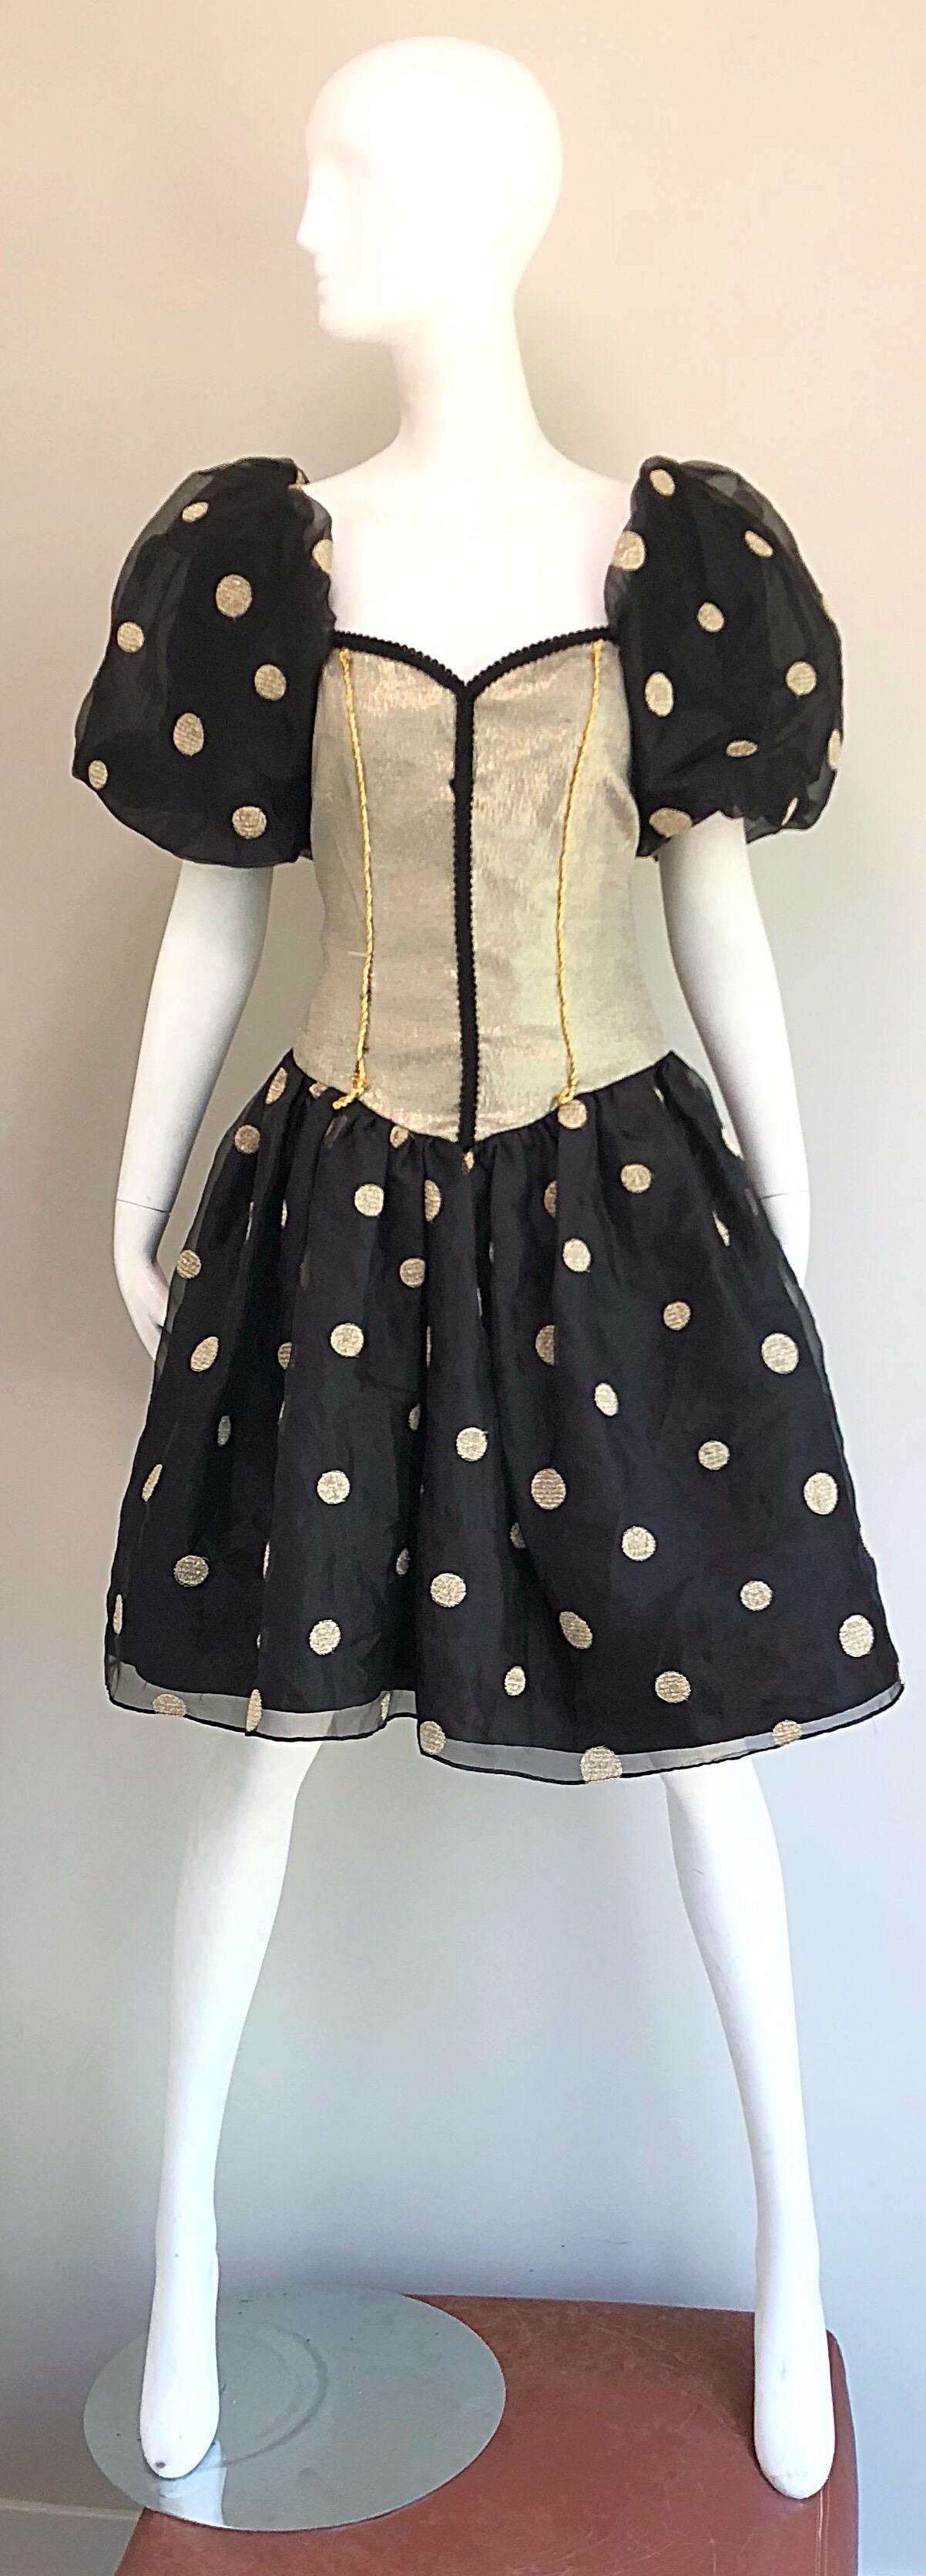 Fabulous Avant Garde 1980s gold and black polka dot fit n' flare corset cocktail dress! Features a muted gold nipped bustier type bodice with oversized chiffon puff sleeves. Flirty full skirt. Hidden zipper up the back with hook-and-eye closure.